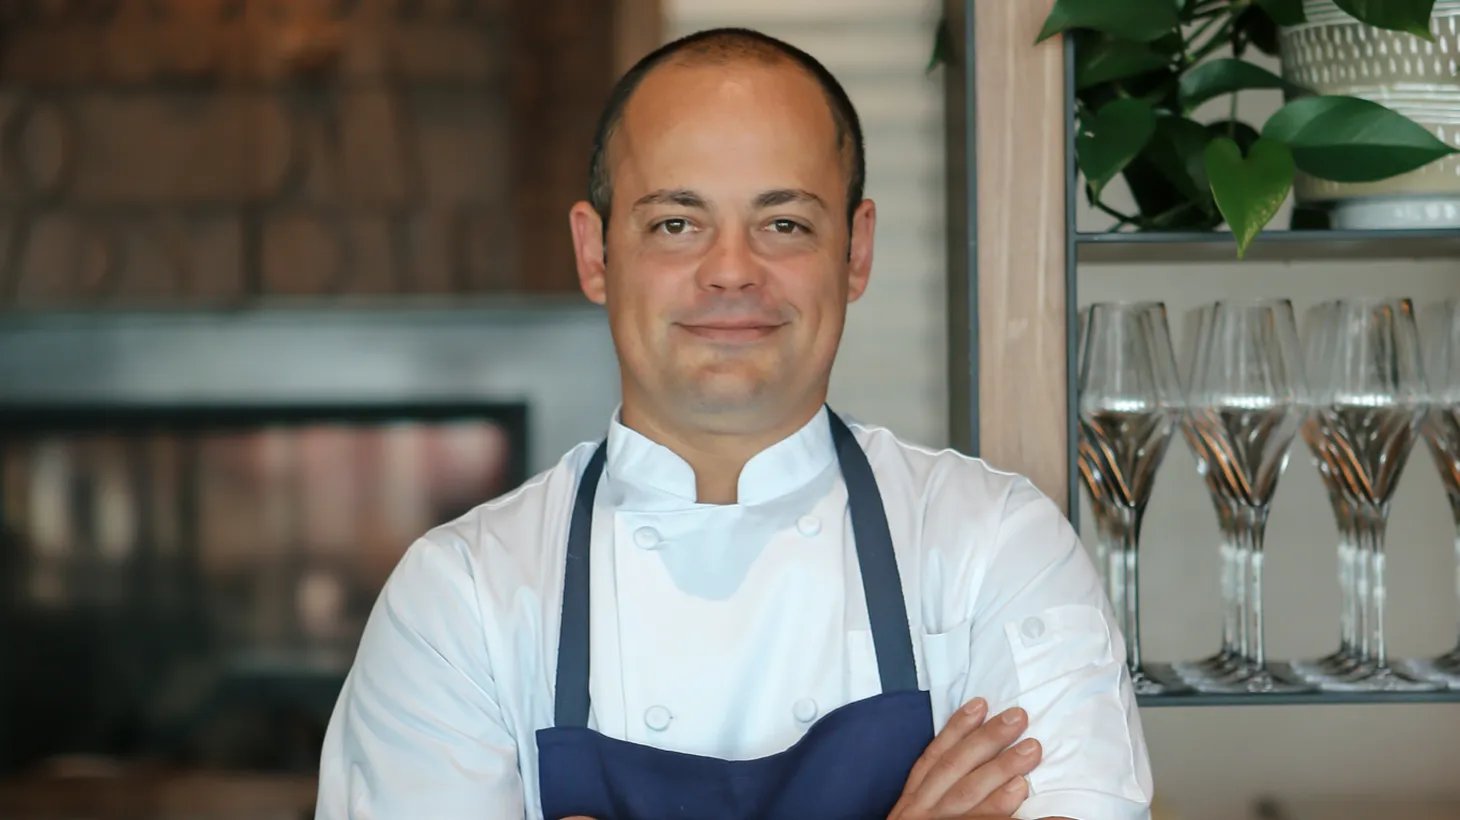 This summer, Roberto Alcocer received a Michelin star for his Oceanside restaurant Valle.